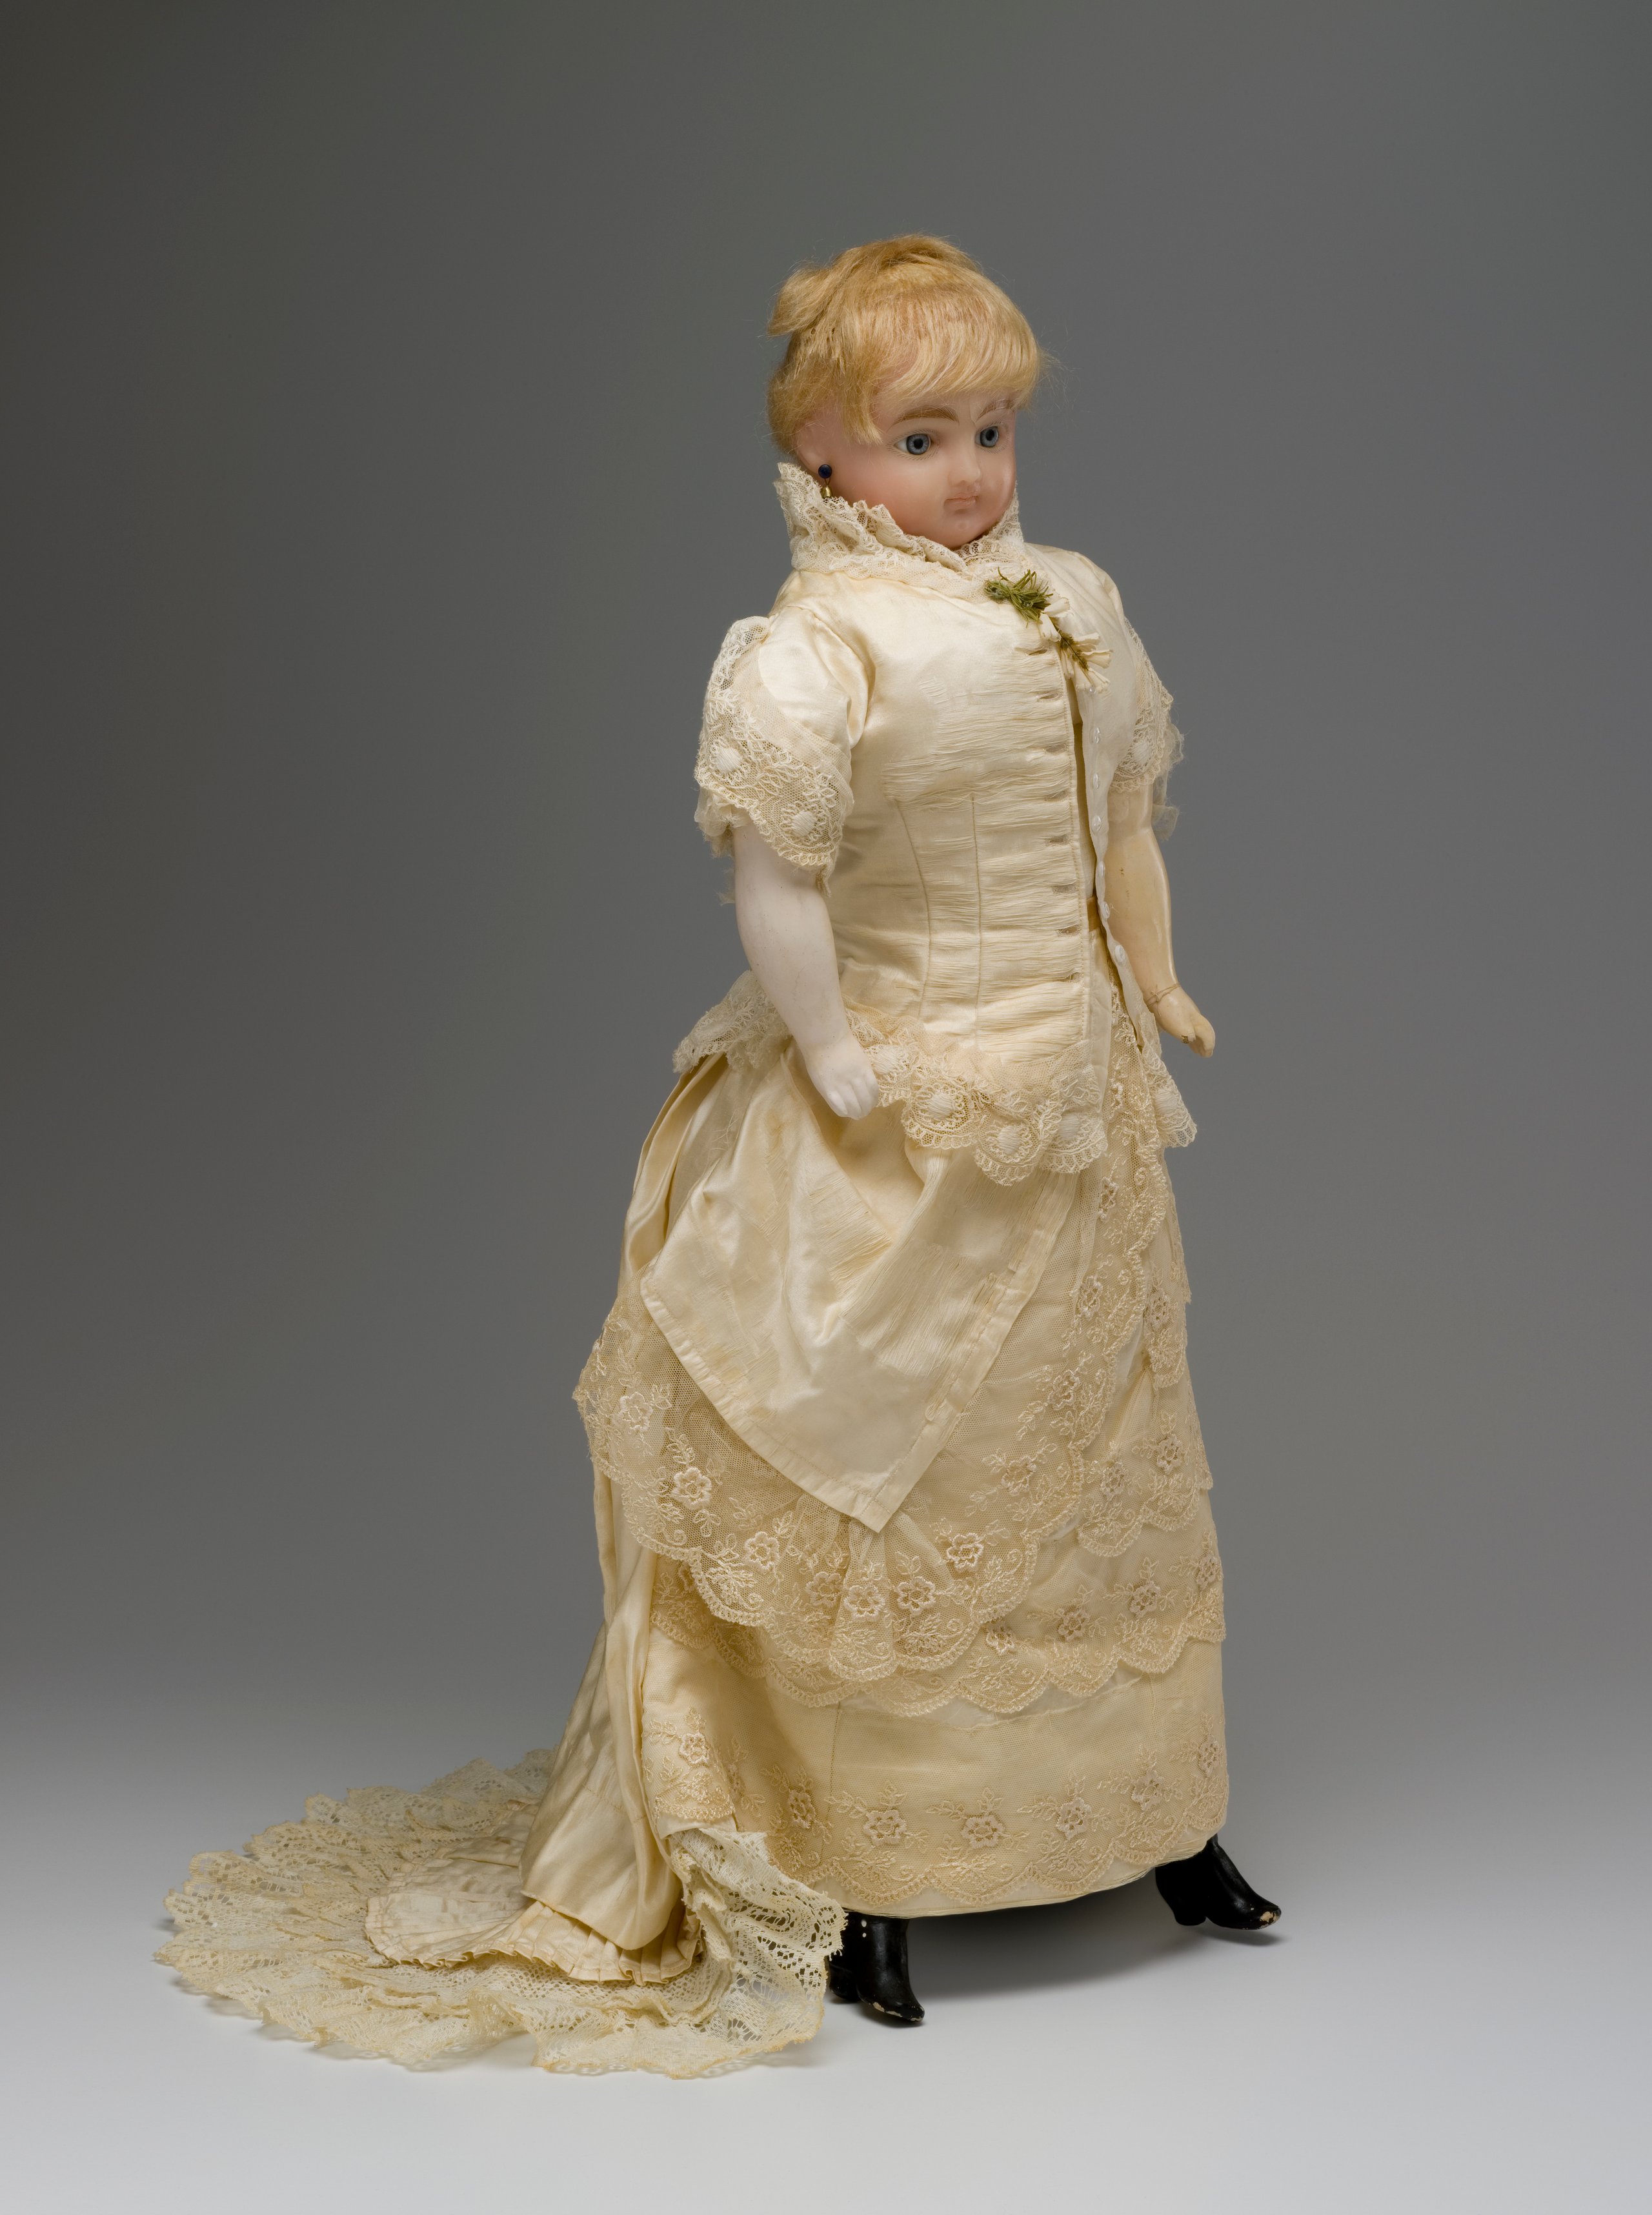 Bride doll with wax face and porcelain arms and legs